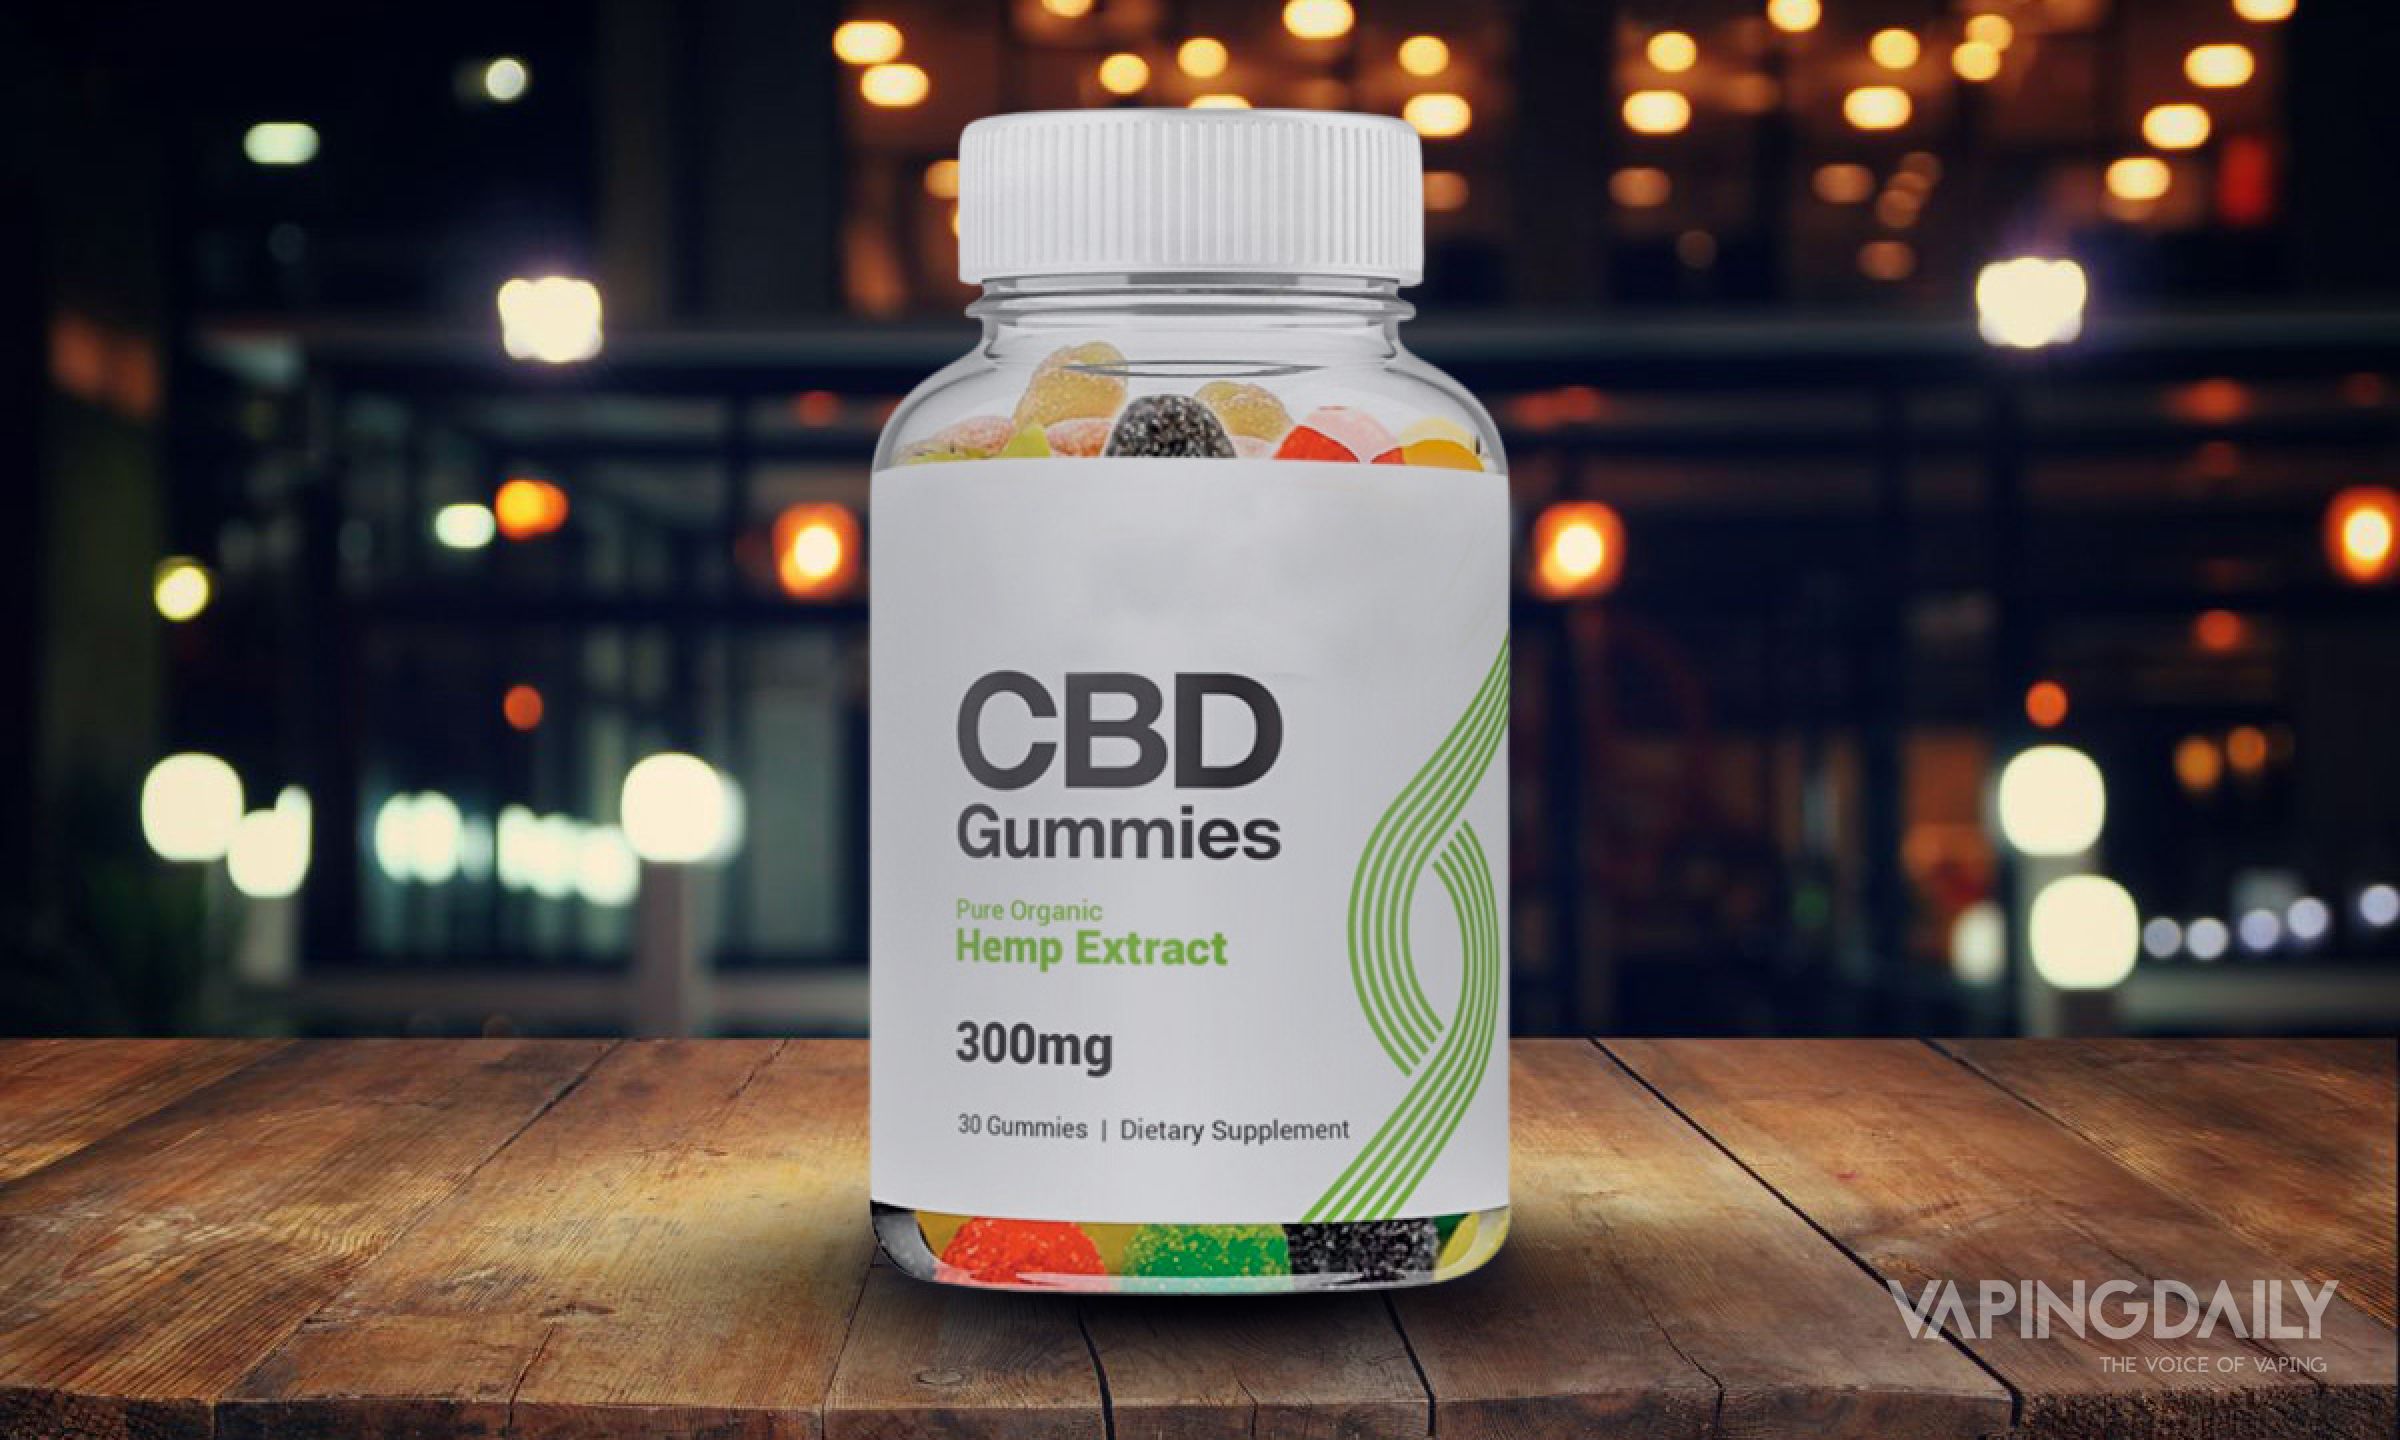 Prime CBD Gummies Review: How Do They Work?